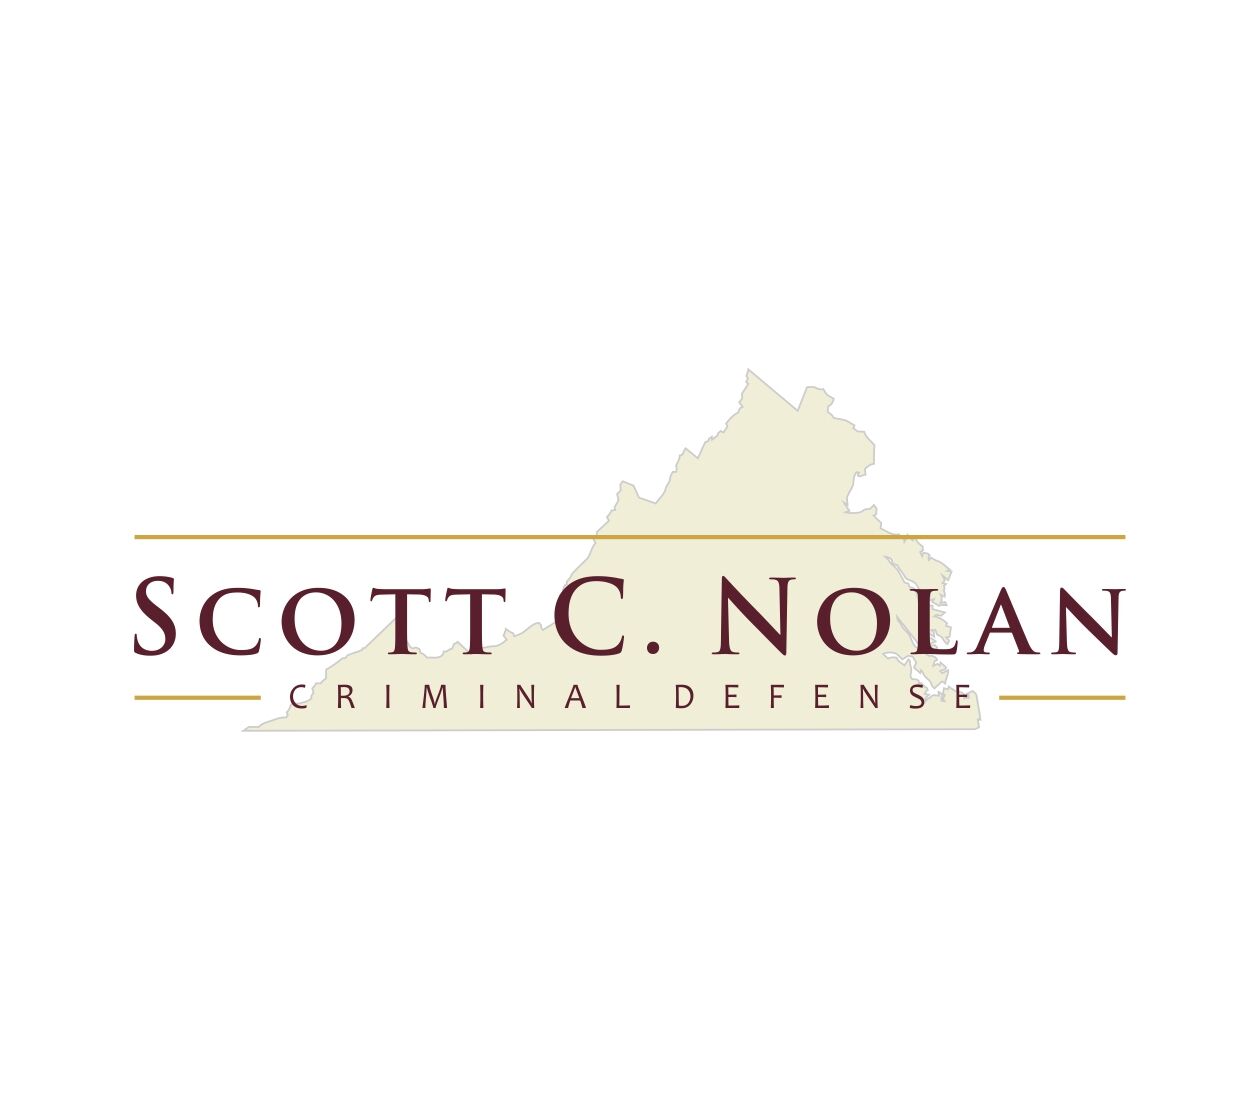 Attorney Scott Nolan at Carluzzo, Rochkind & Smith Offers Expanded Criminal Defense Services in the Manassas Area